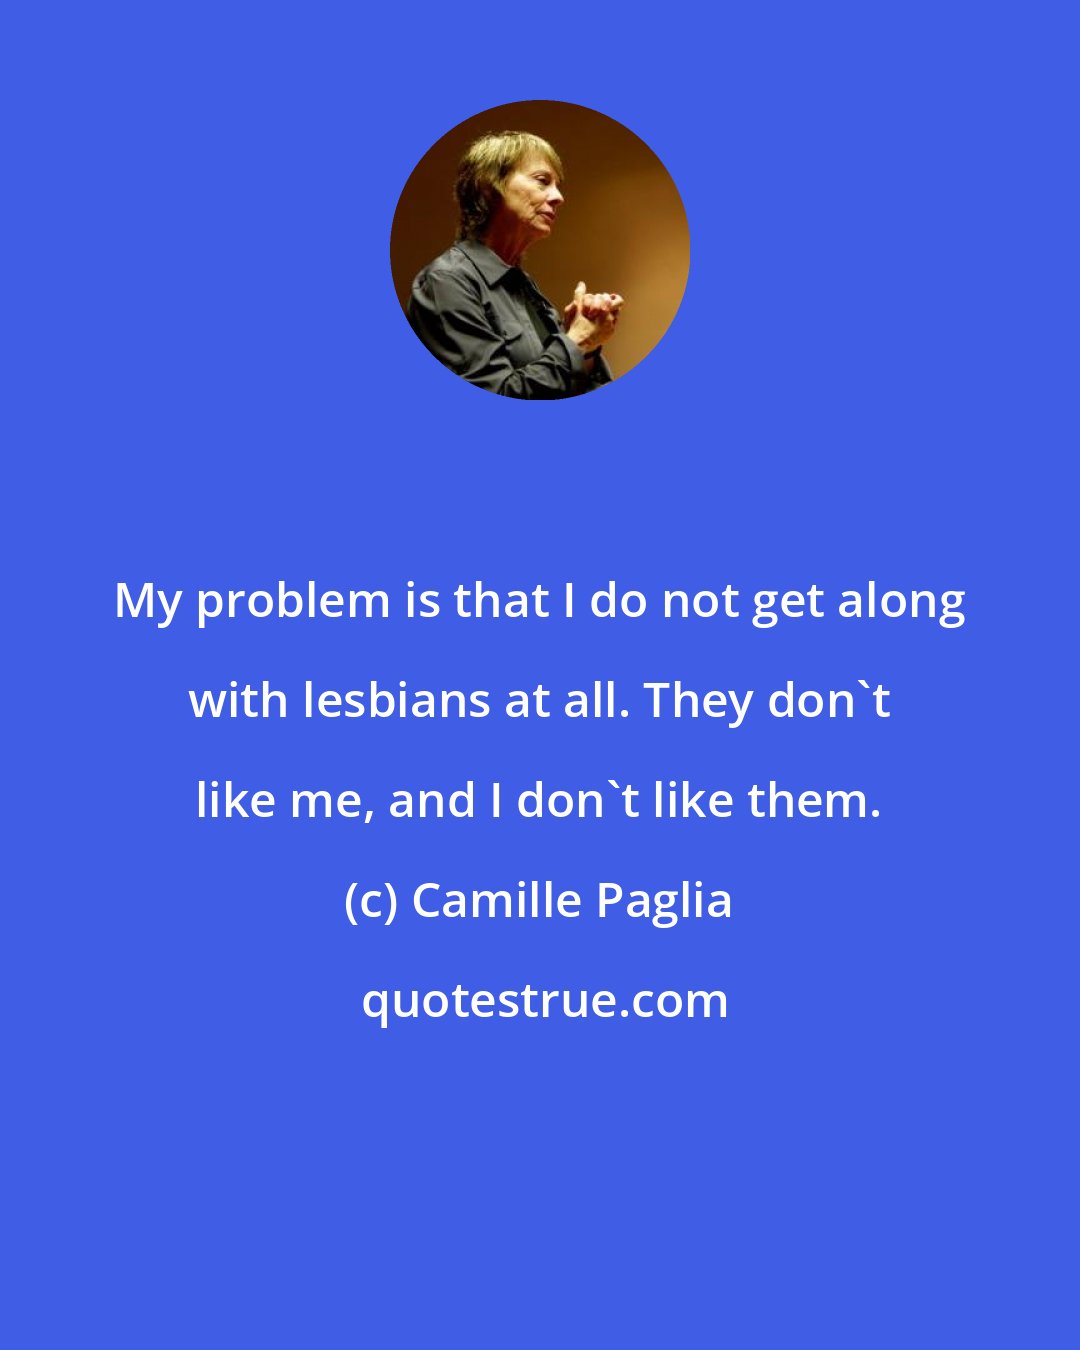 Camille Paglia: My problem is that I do not get along with lesbians at all. They don't like me, and I don't like them.